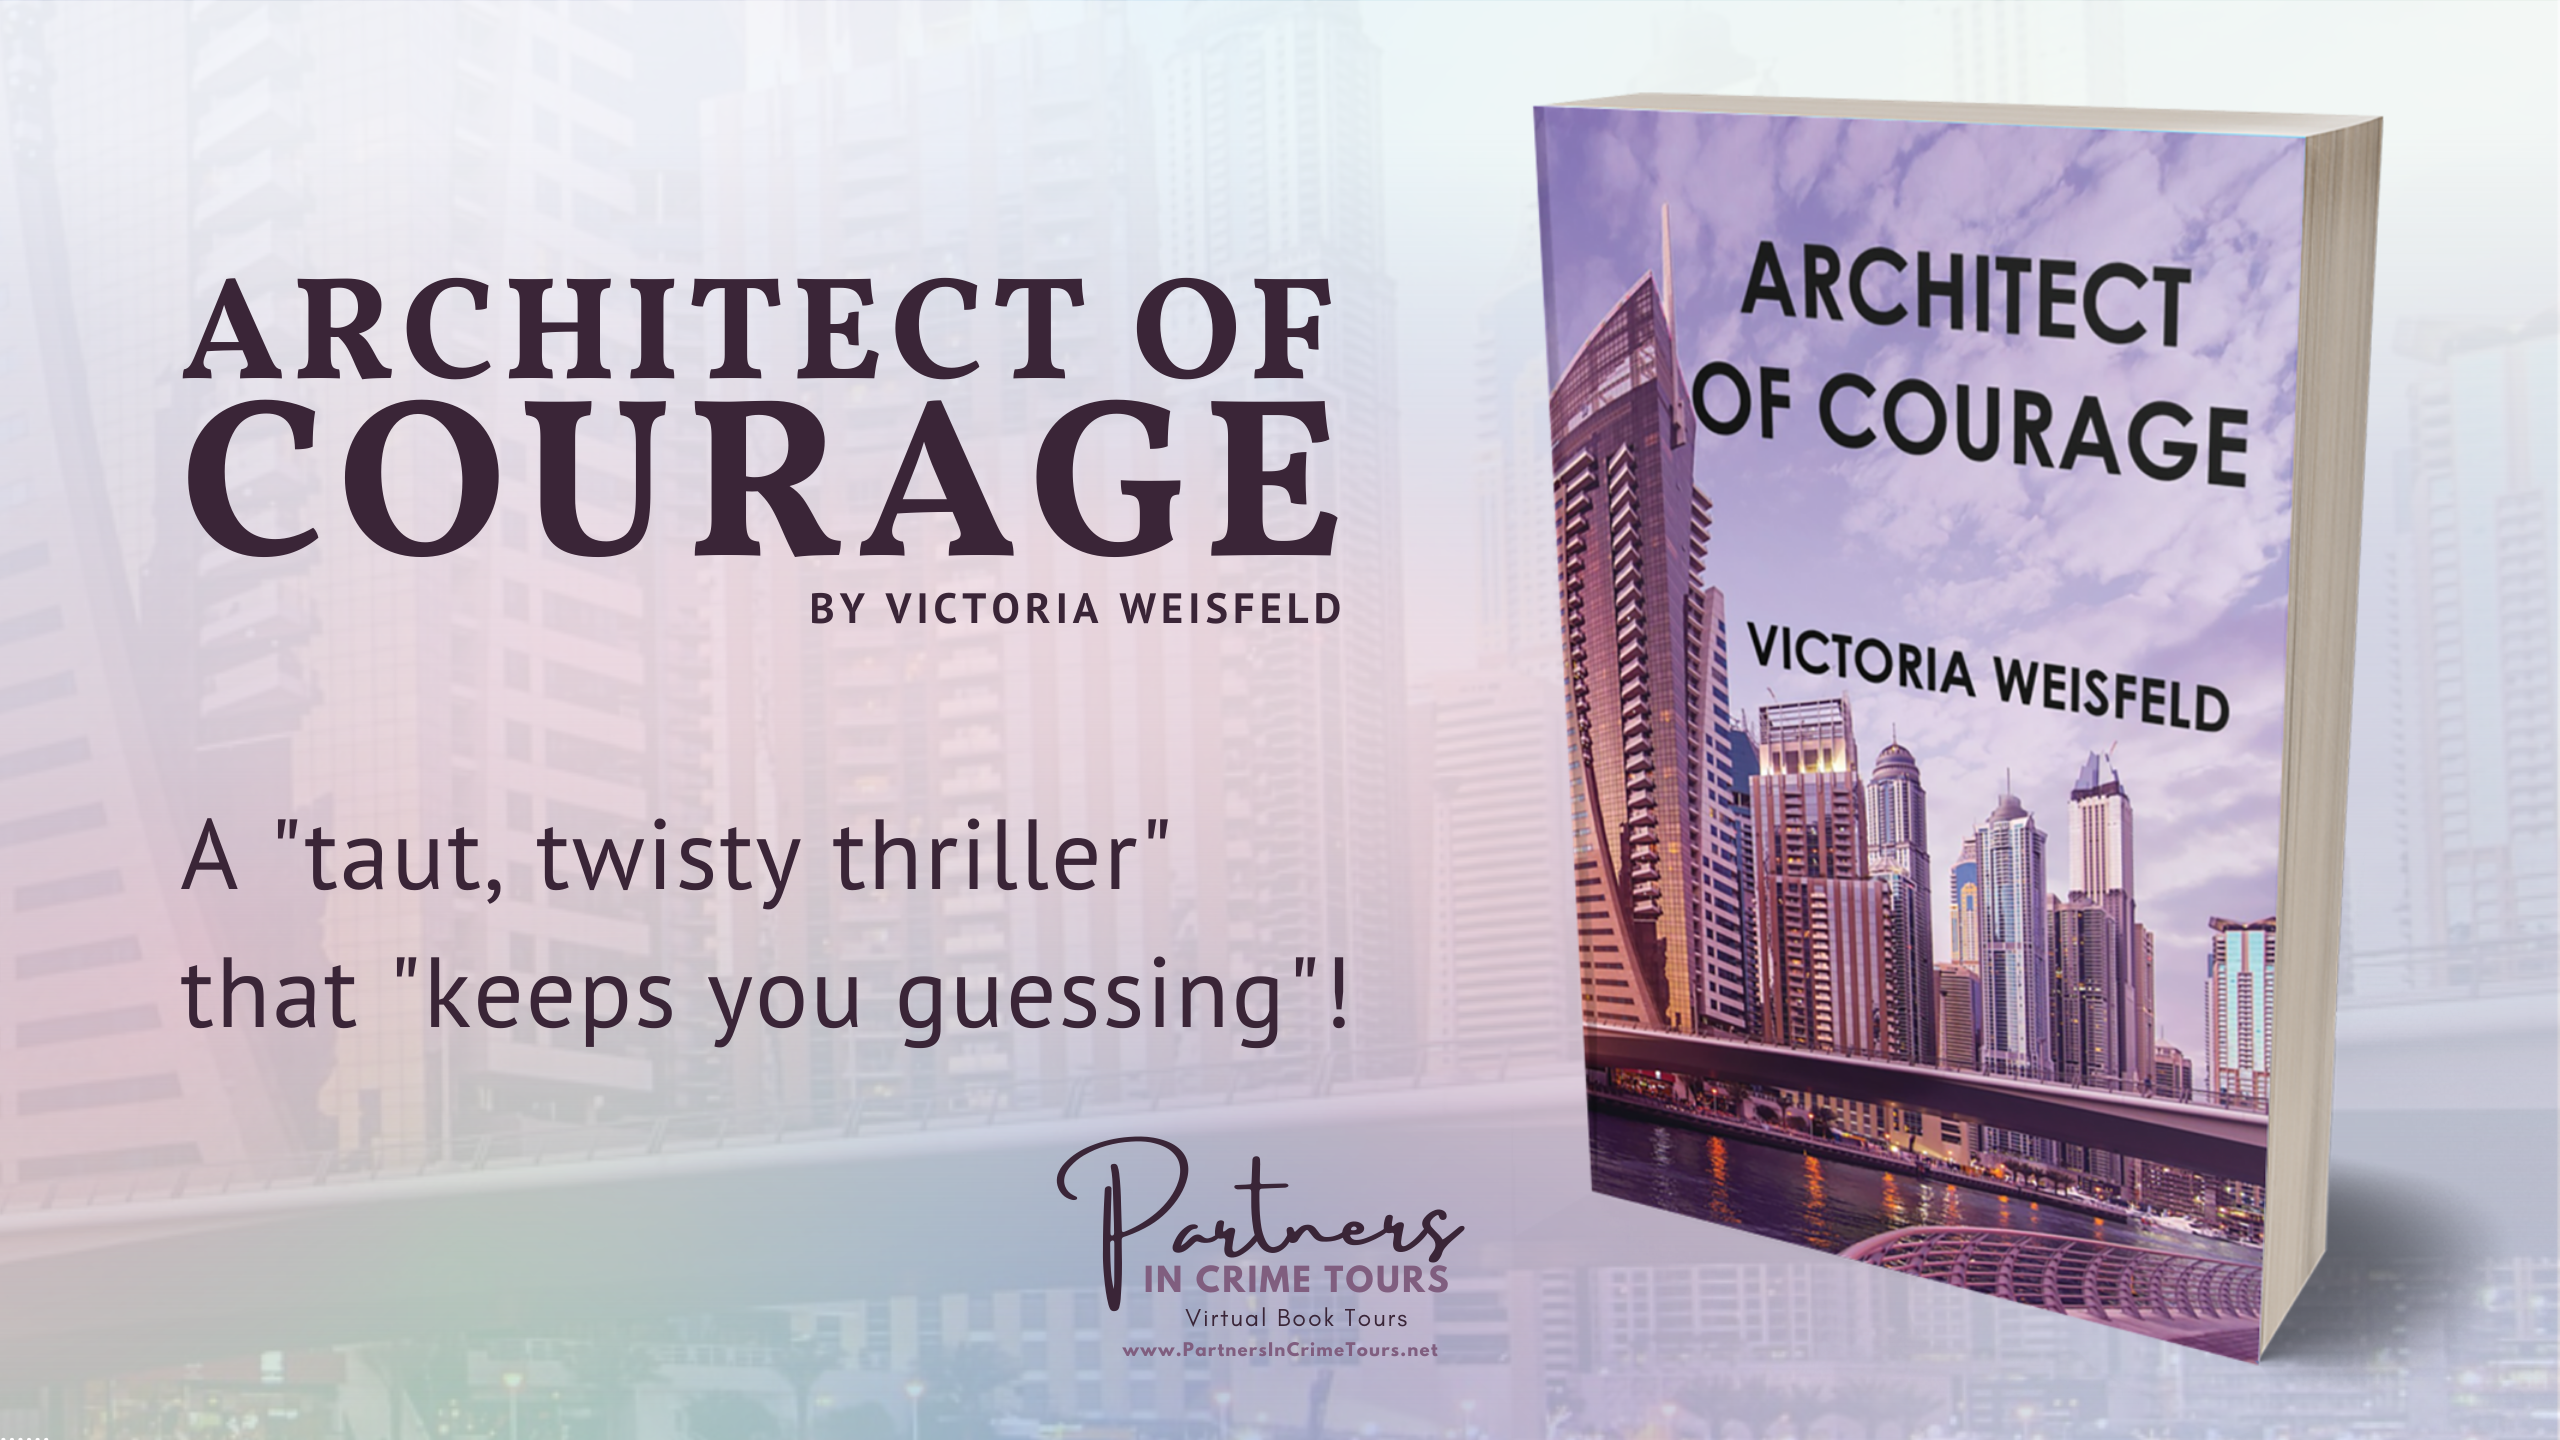 Architect of Courage